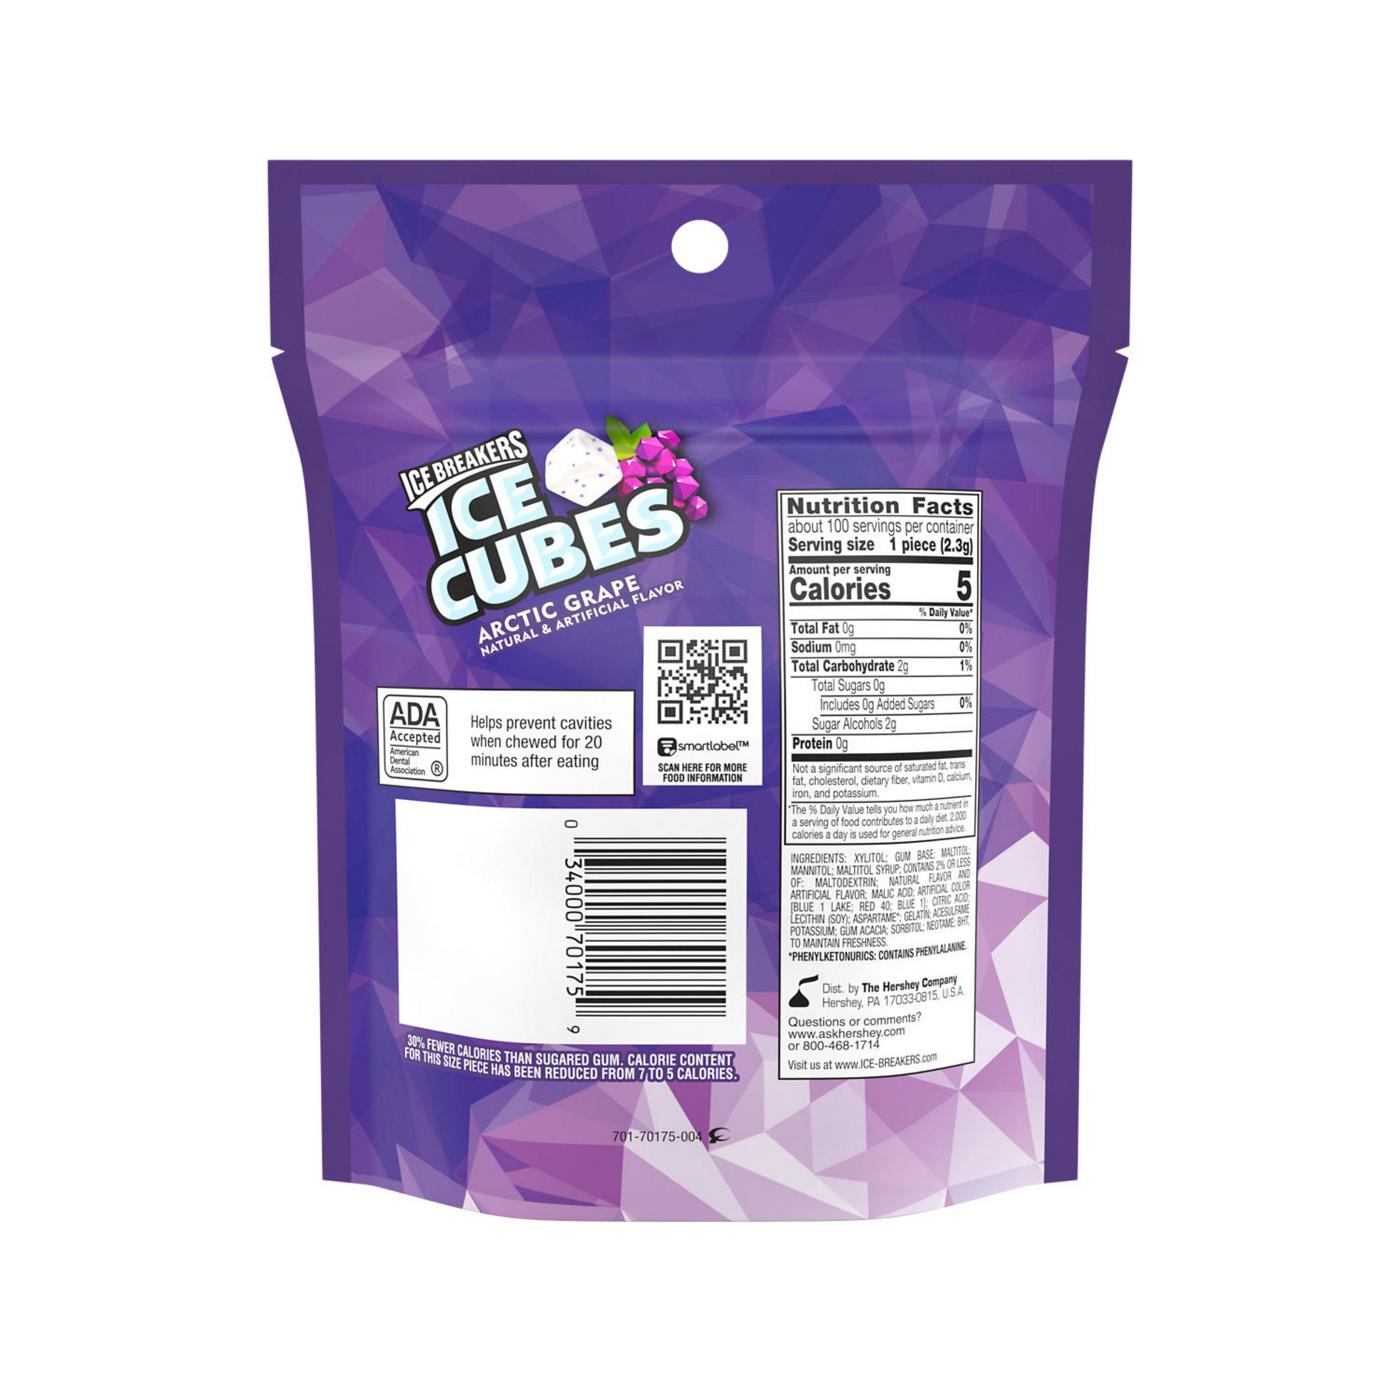 Ice Breakers Ice Cubes Arctic Grape Sugar Free Chewing Gum Pouch; image 2 of 7